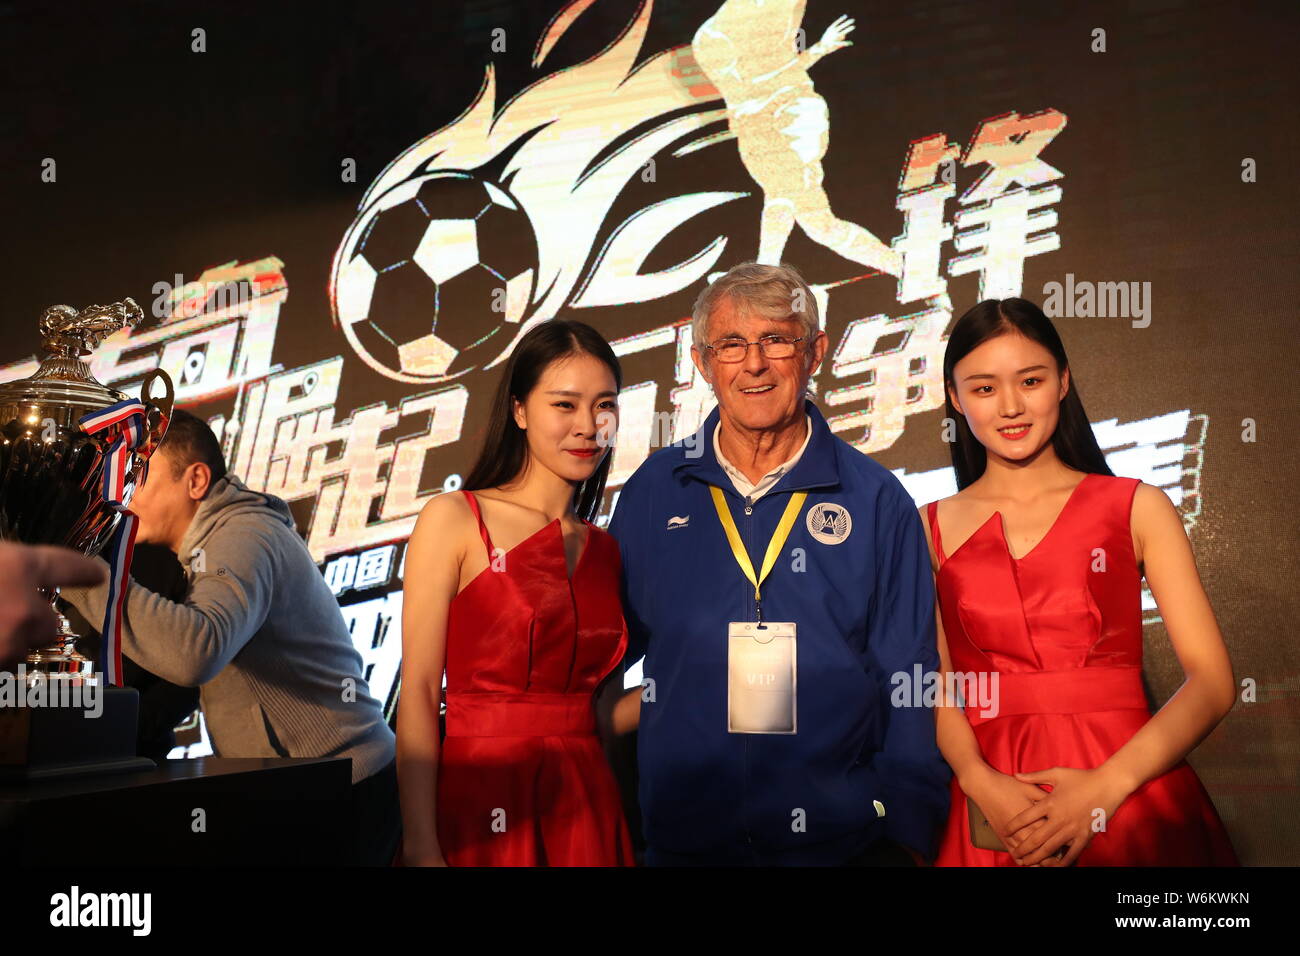 Serbian football coach and former player Bora Milutinovic, center, attends a press conference of Sina 5v5 Football Golden League Finals in Chengdu cit Stock Photo